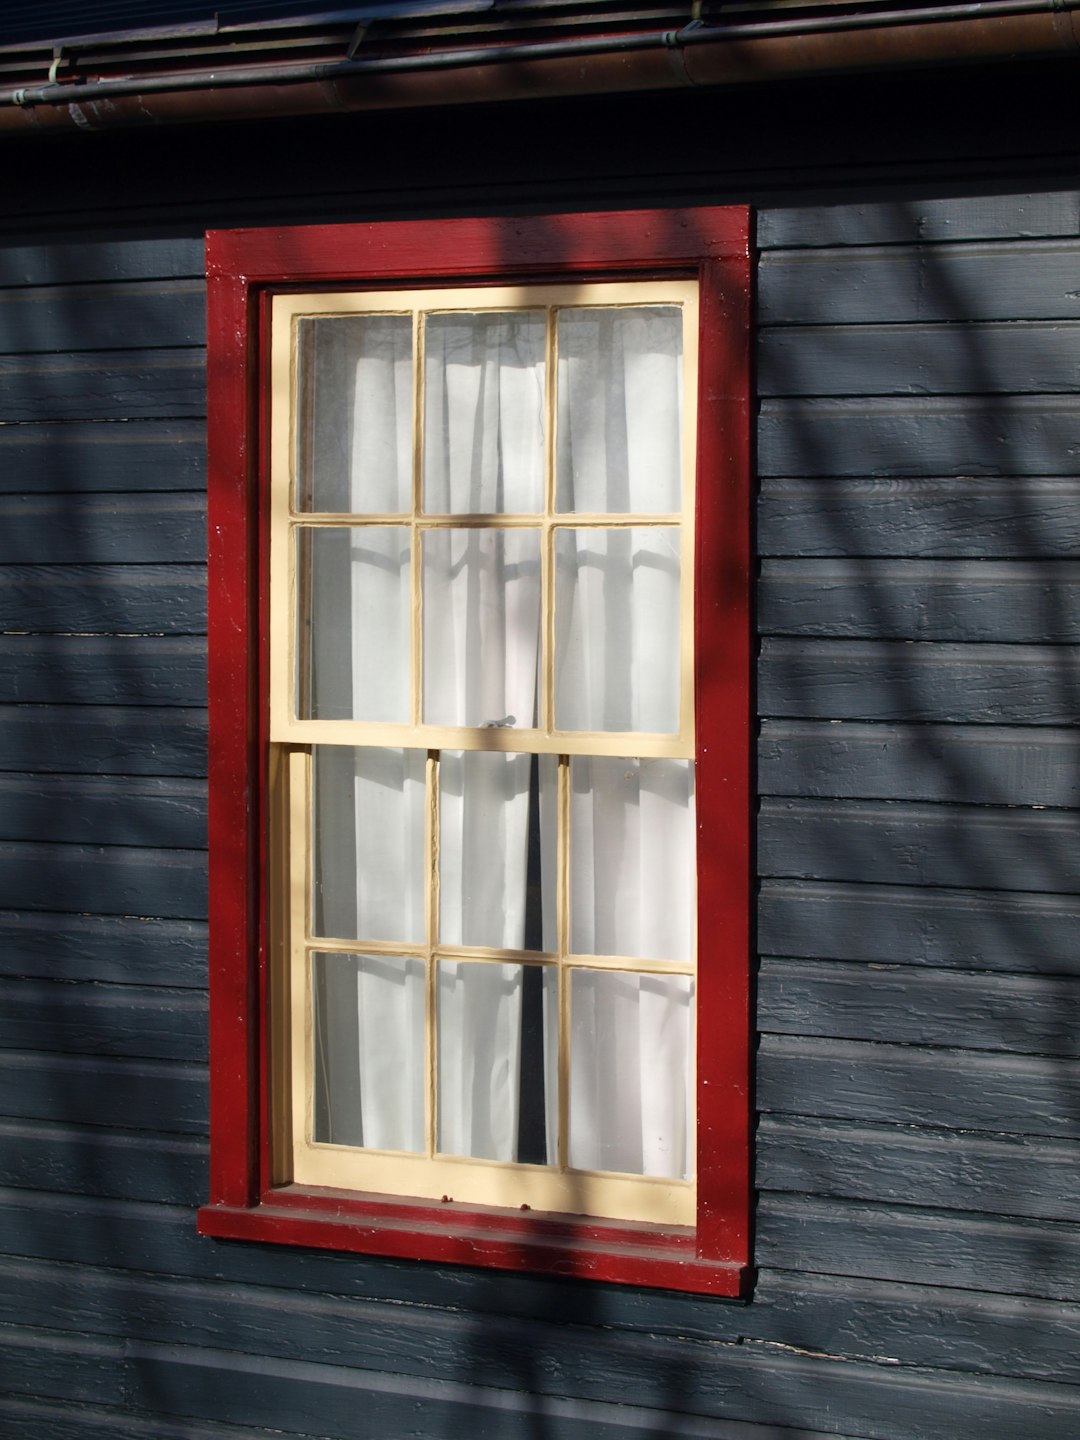 American colonial six-over-six pane window in the village of Waterford, Virginia. The village is listed on the National Register of Historic Places.